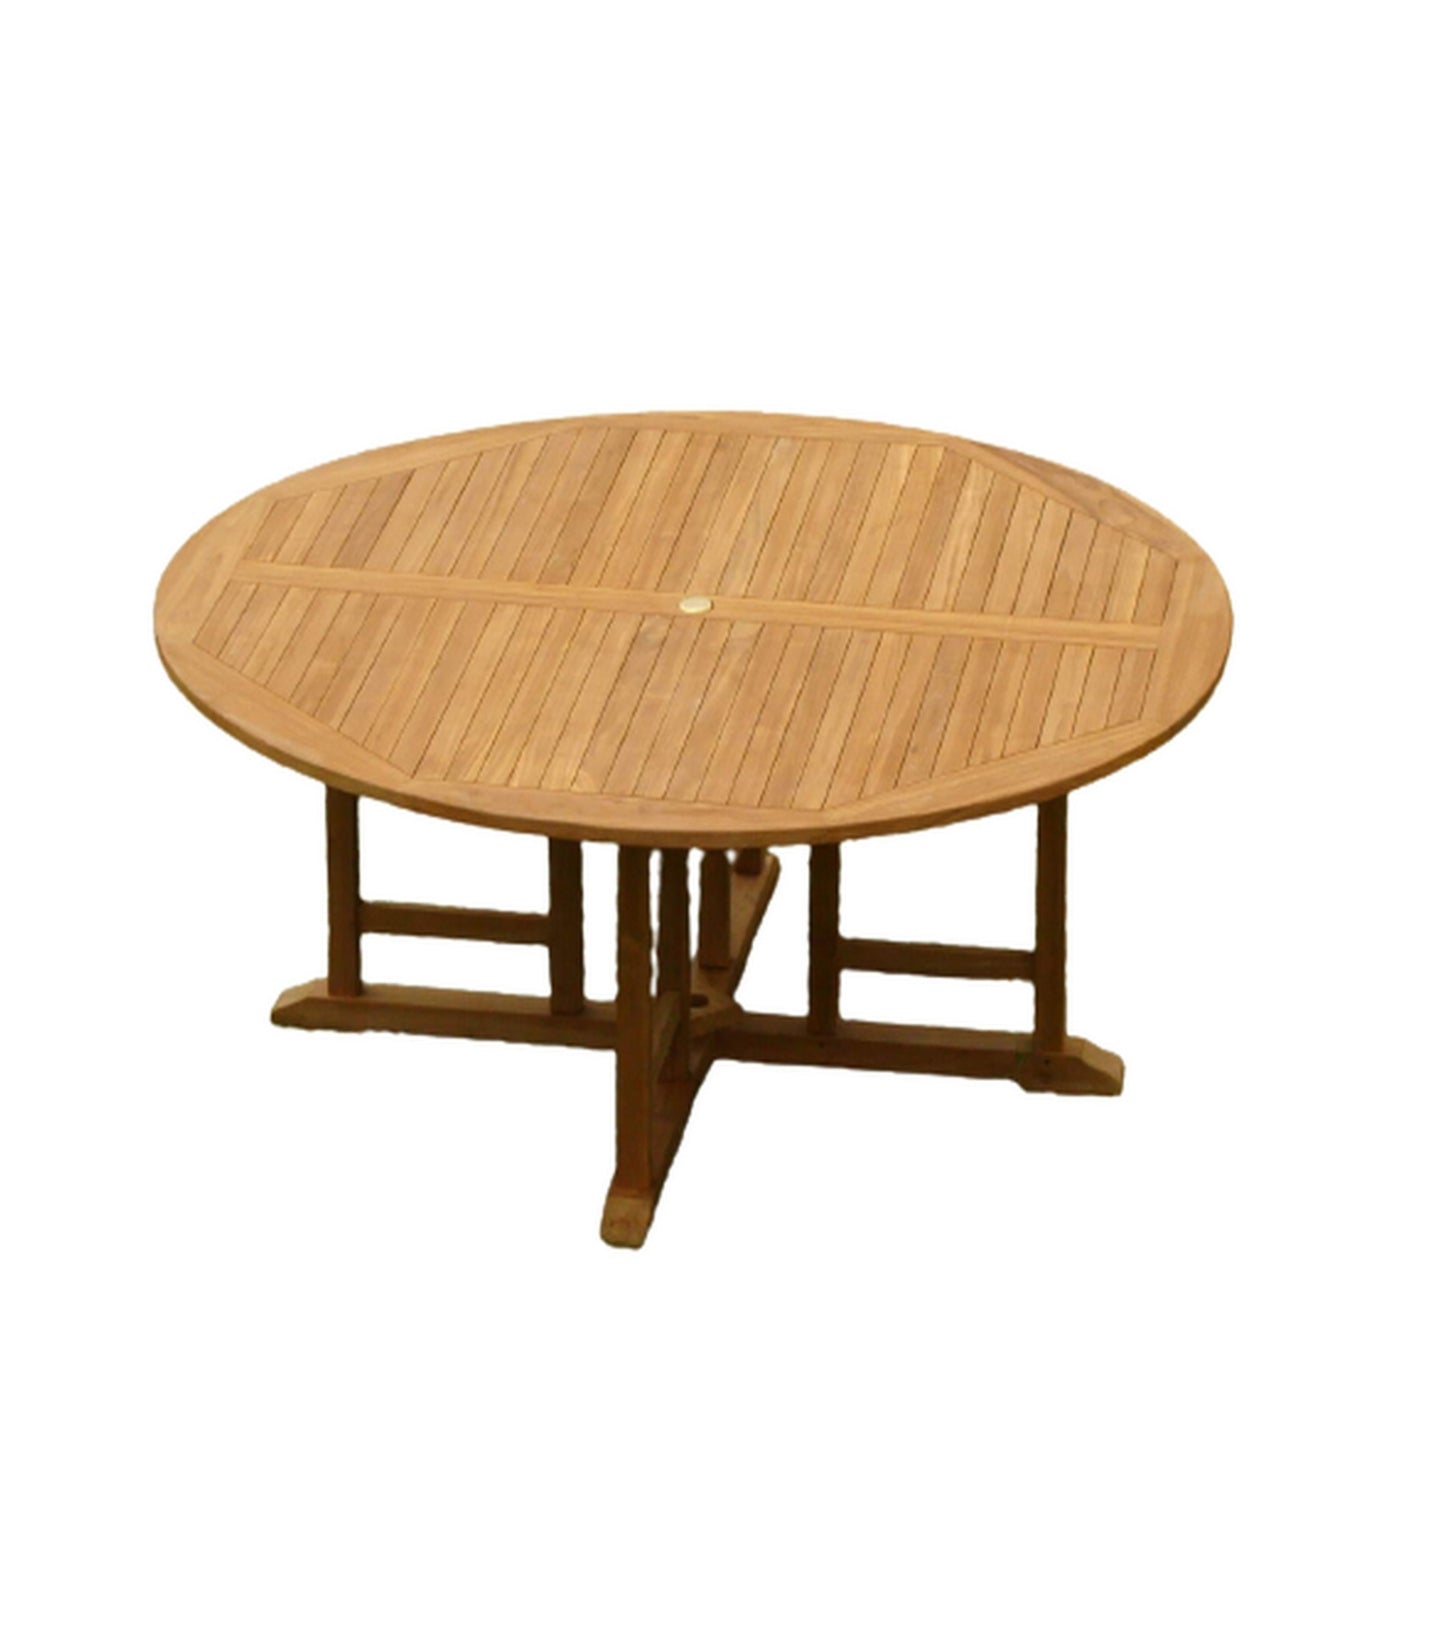 72" Round Table and Algrave Stacking Chairs